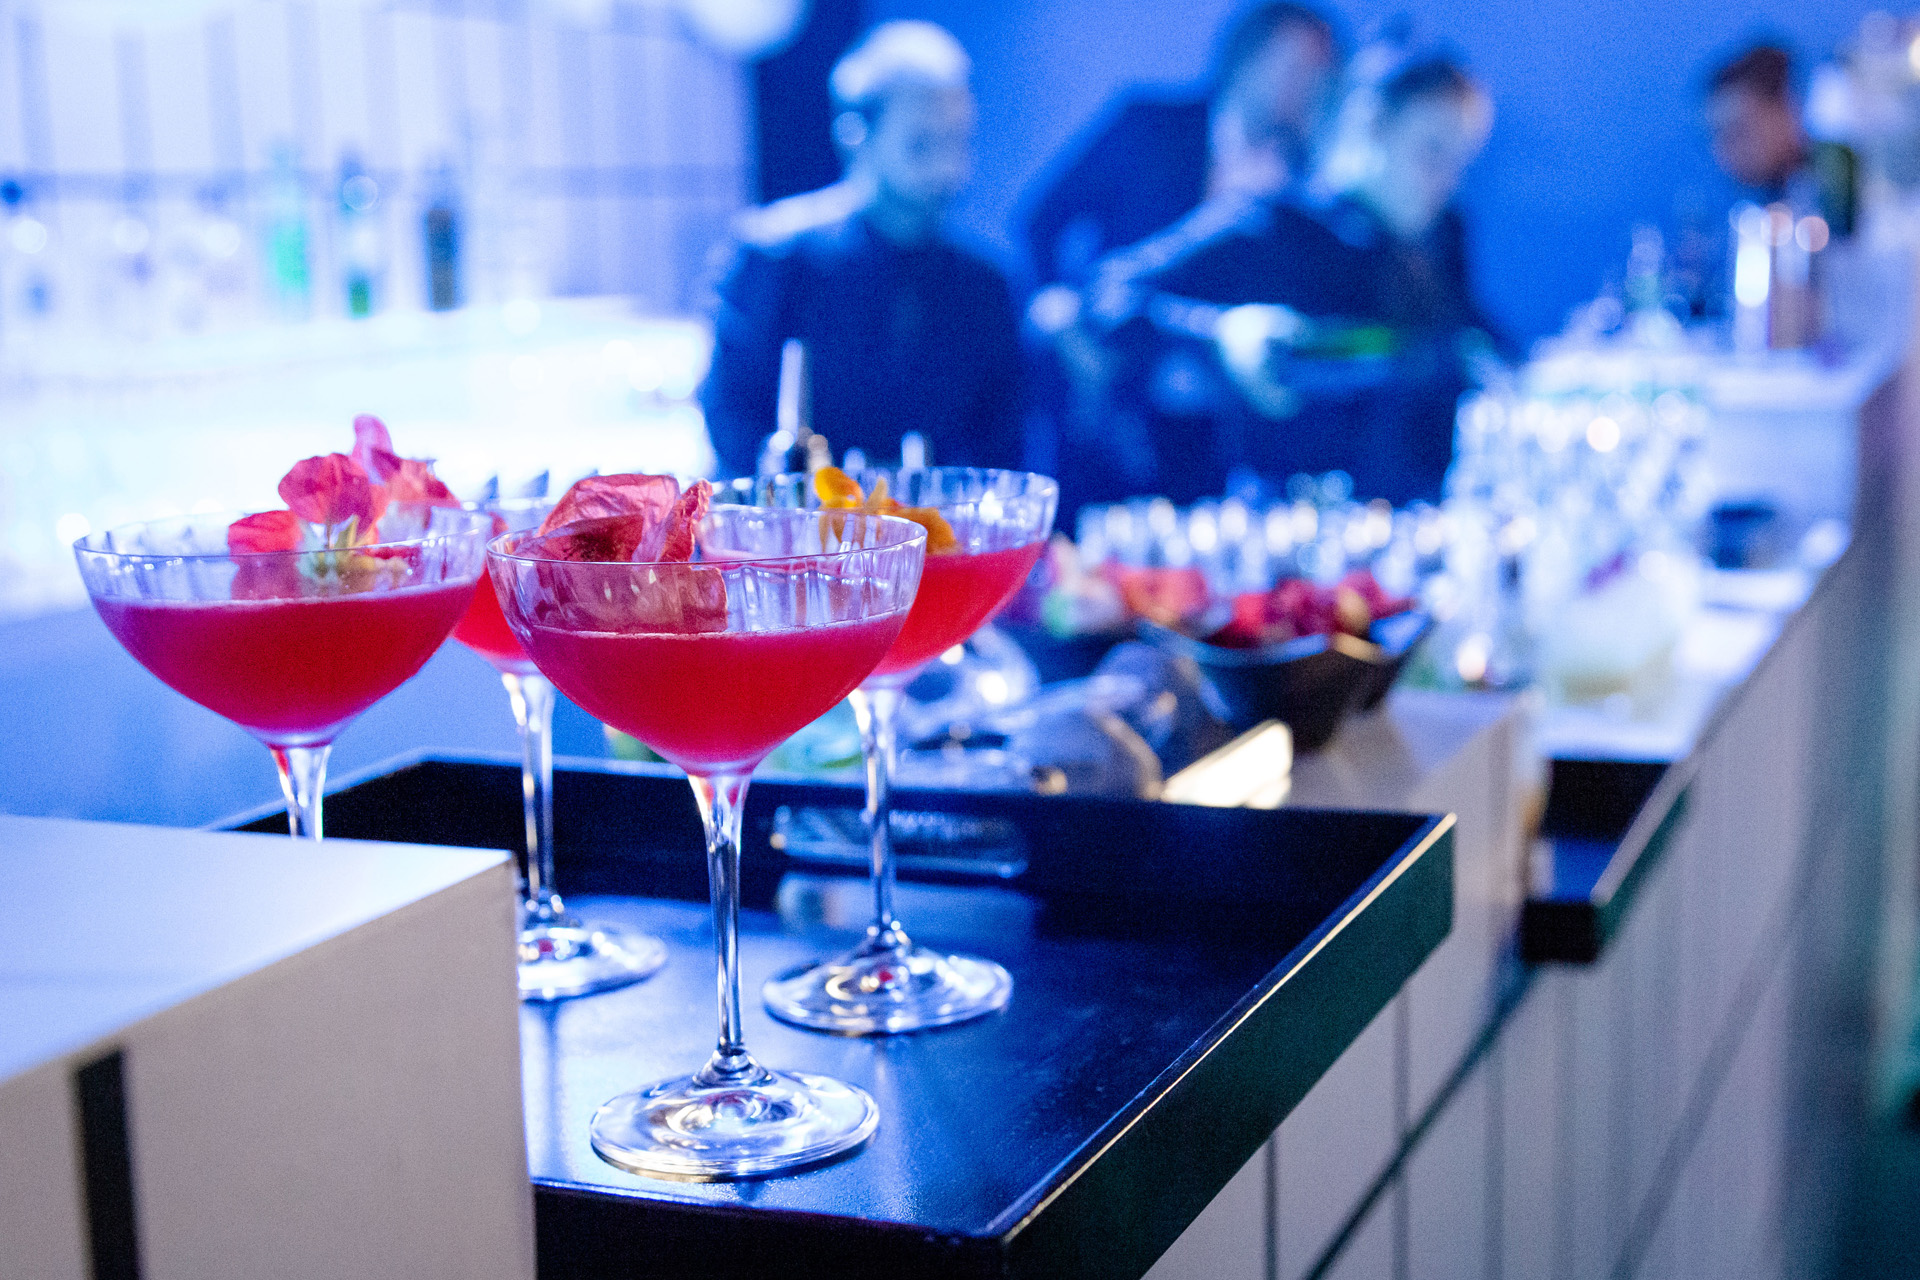 cocktails in the foreground at a party